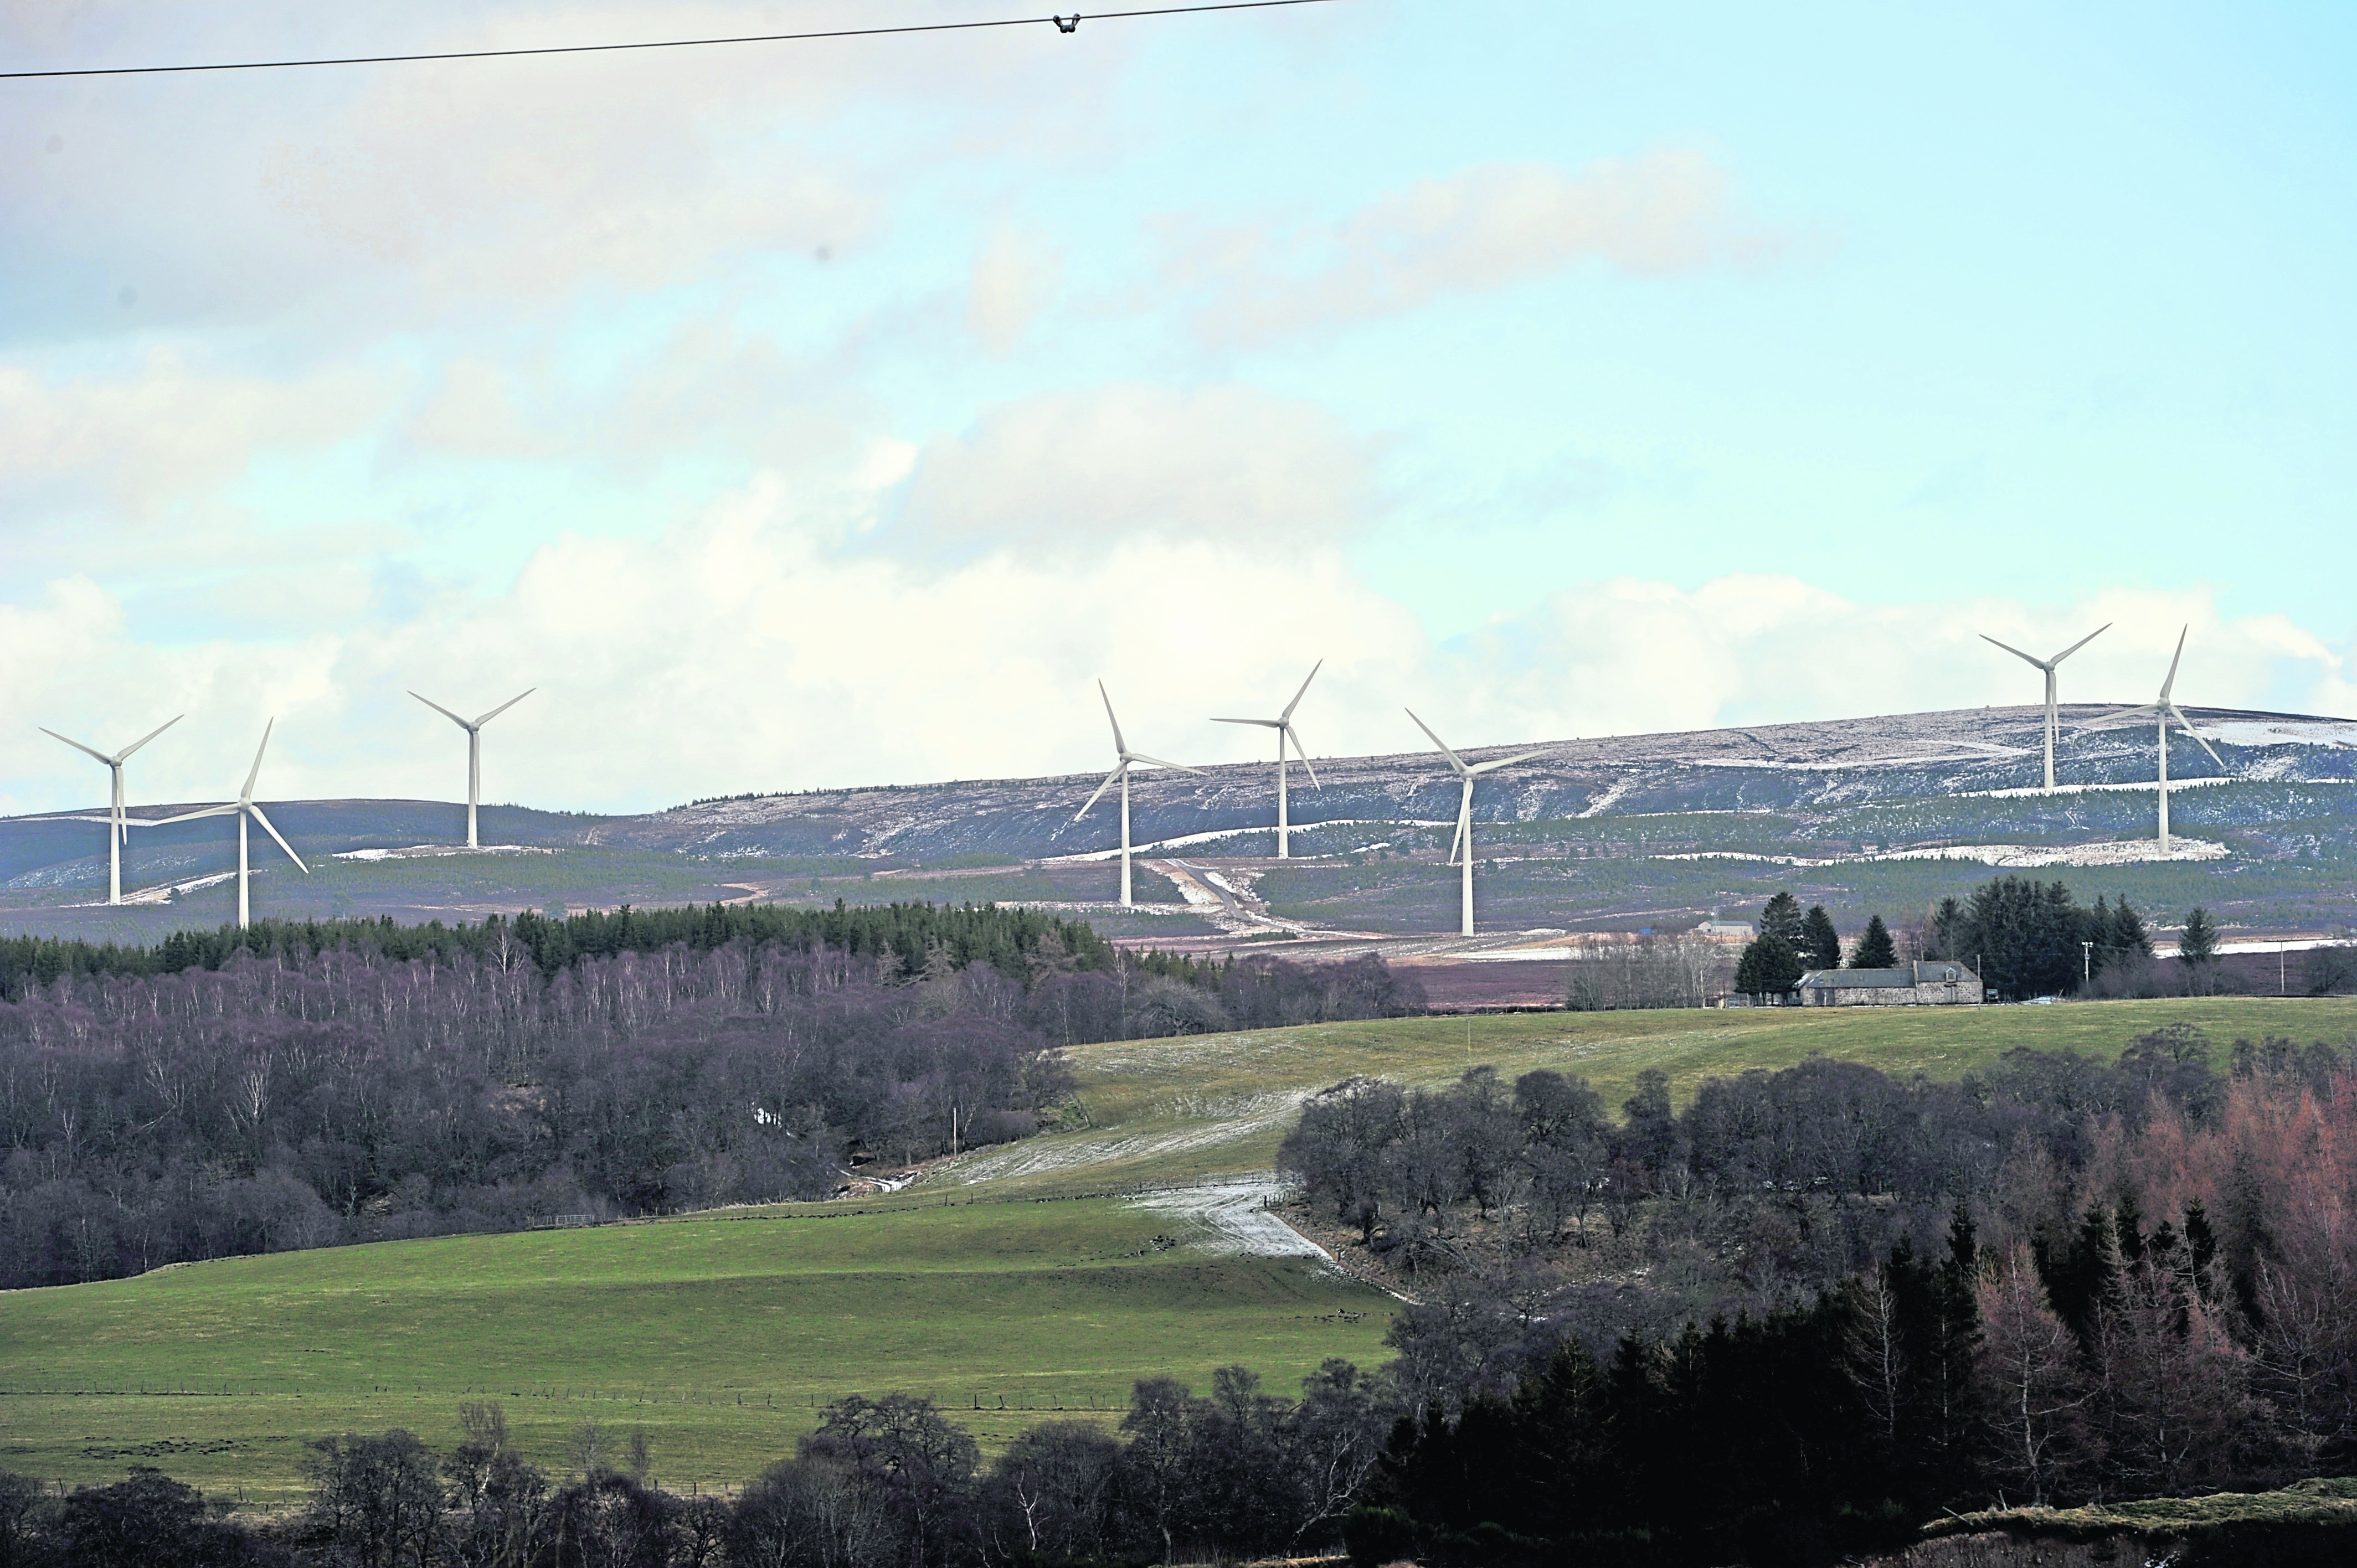 Looking east to the Berry Burn Windfarm, south of Forres.

Picture by Gordon Lennox 01/03/2017